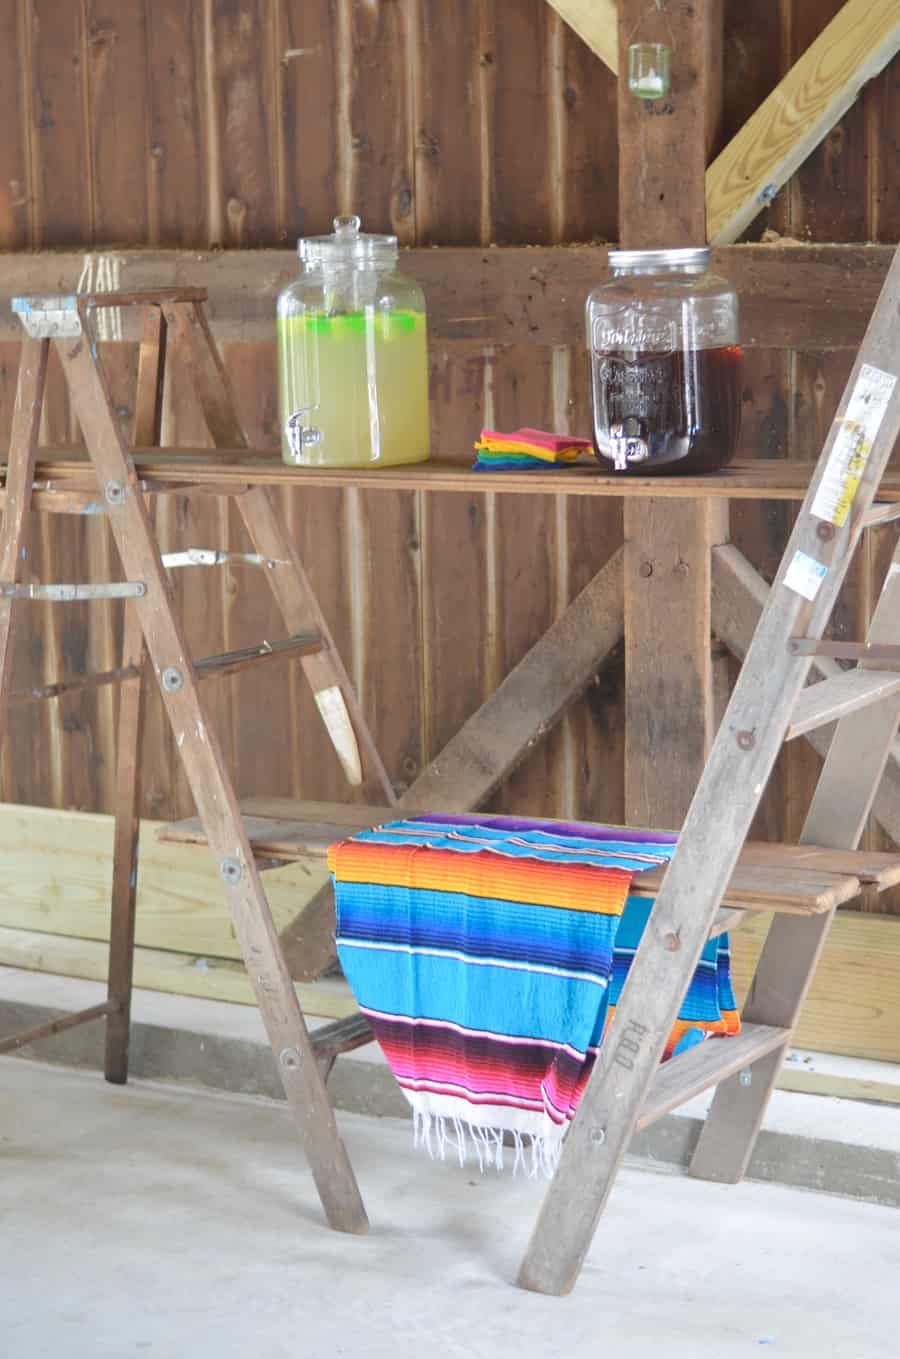 Decorating details to host a colorful rustic barn party.